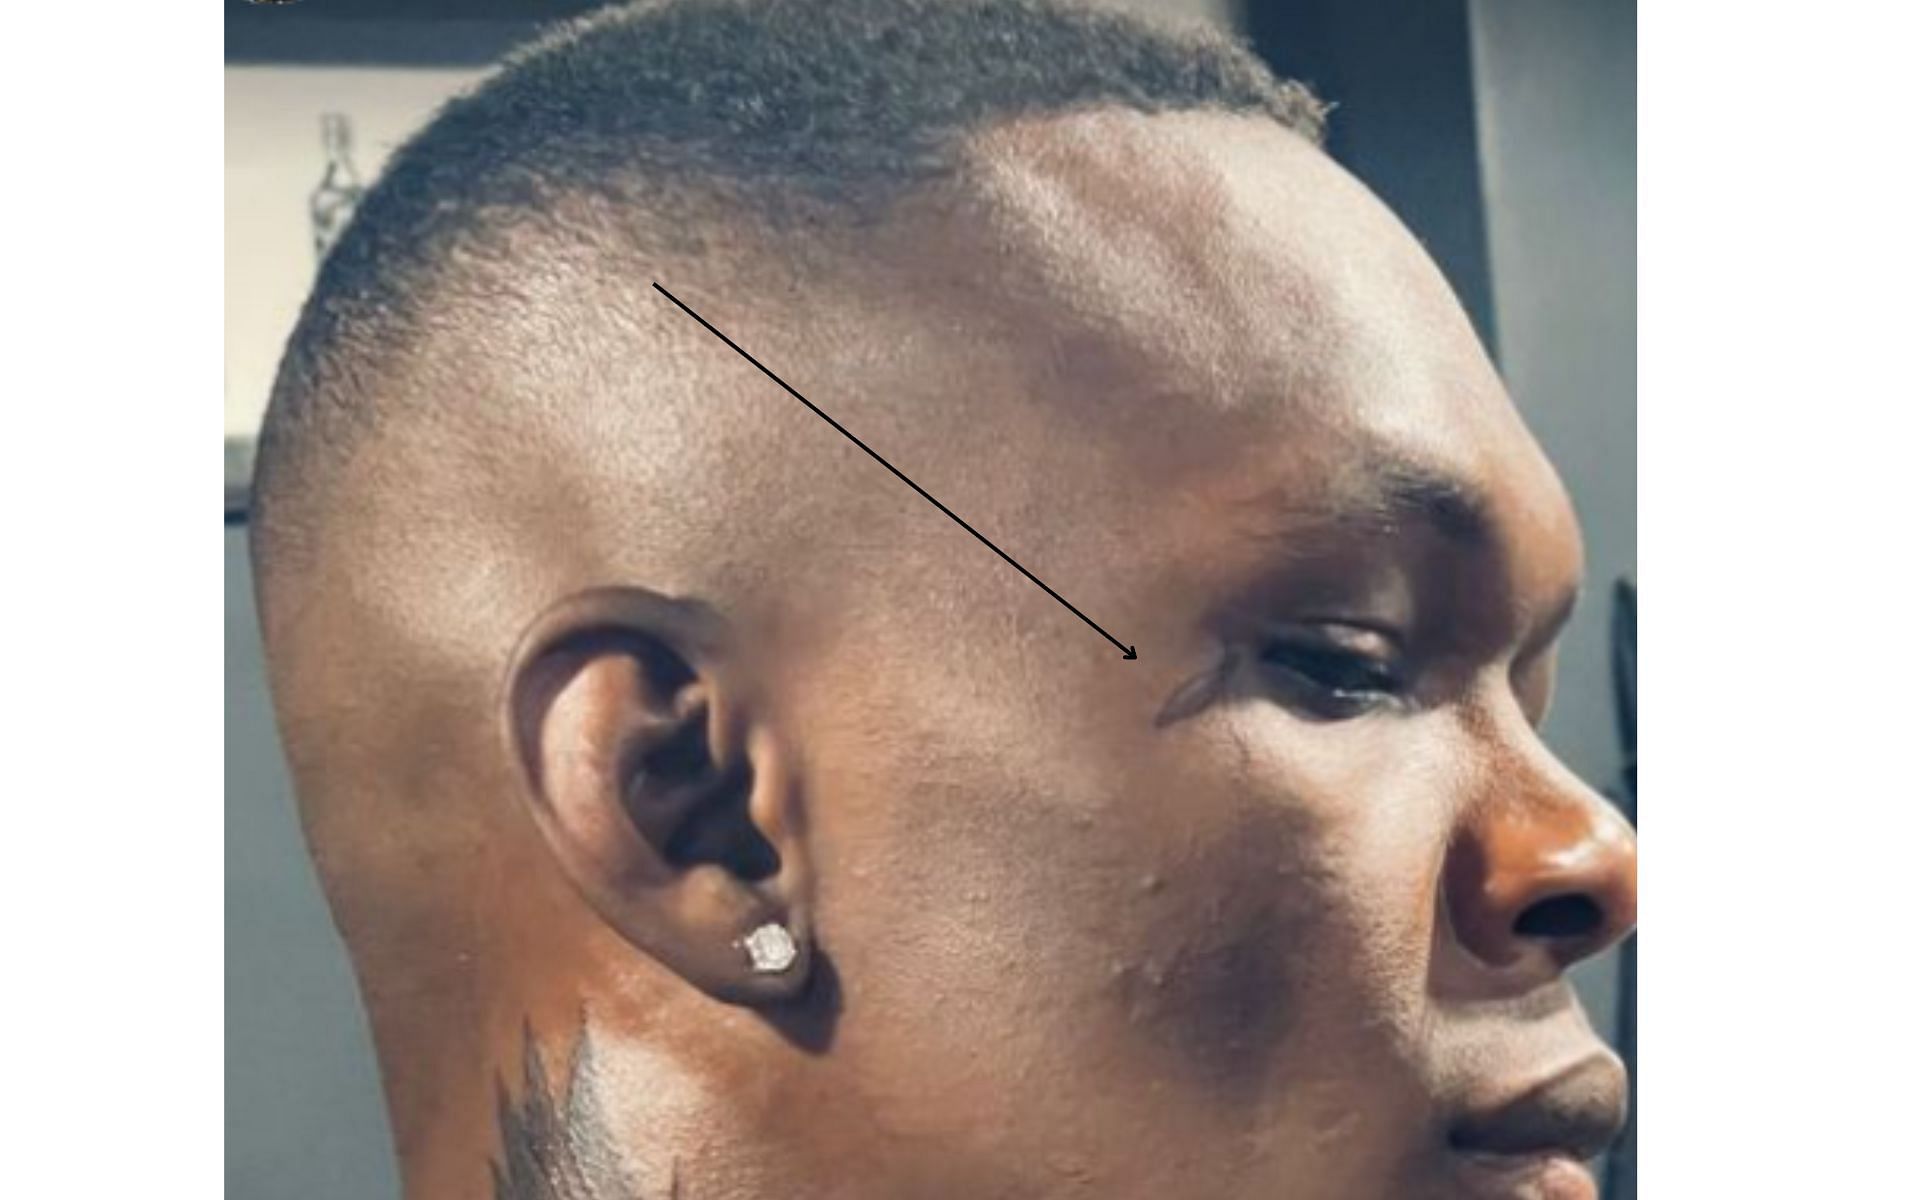 Israel Adesanya flaunts new neck tattoo asks fans to decode its meaning